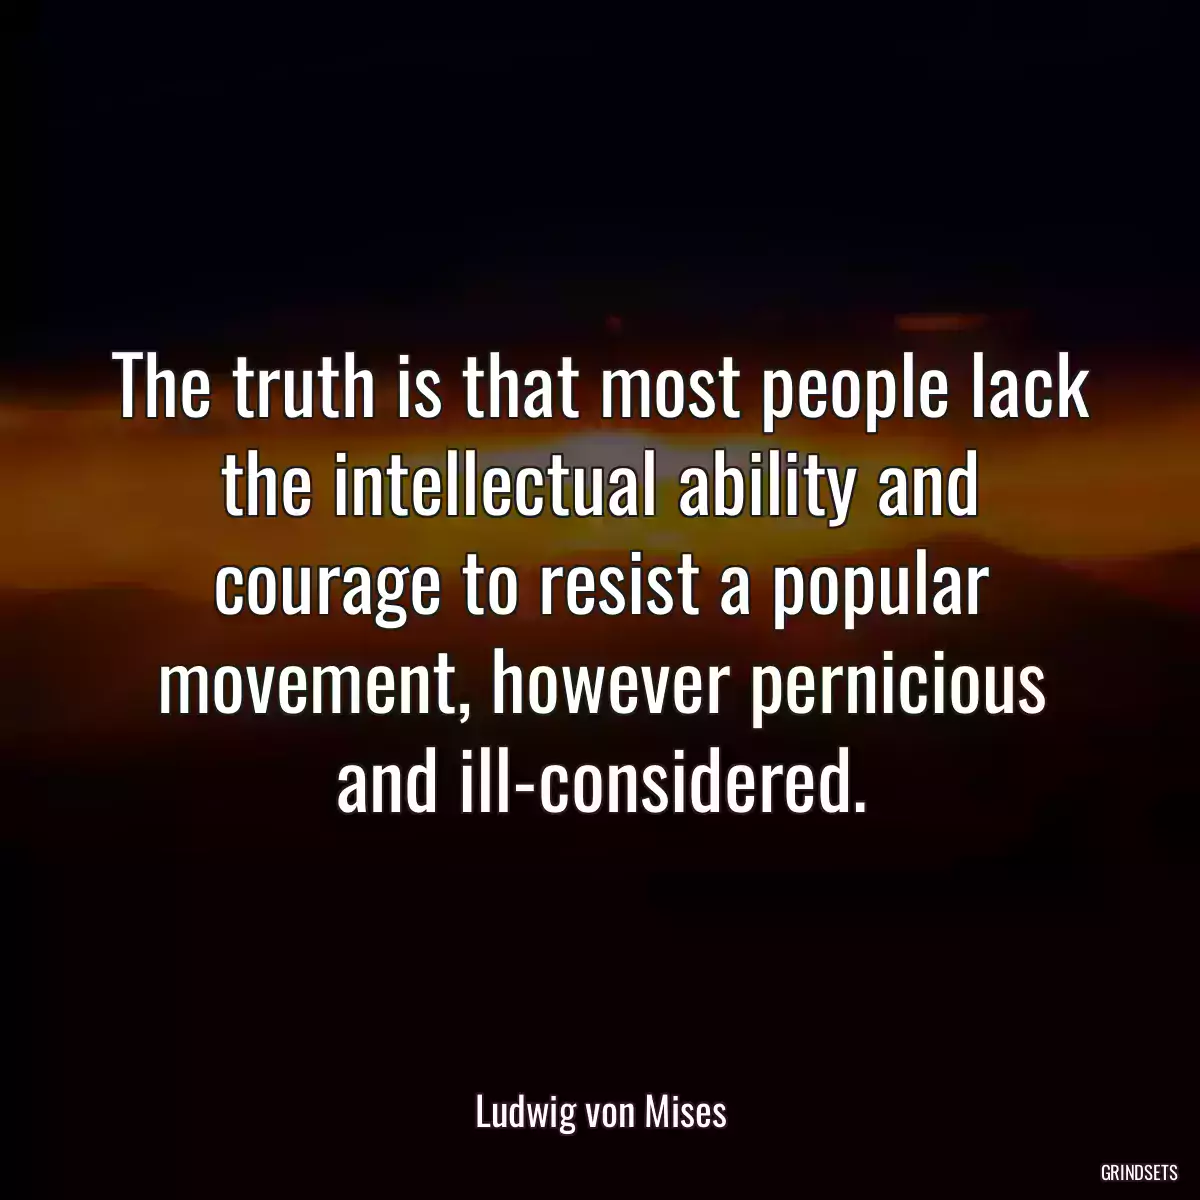 The truth is that most people lack the intellectual ability and courage to resist a popular movement, however pernicious and ill-considered.